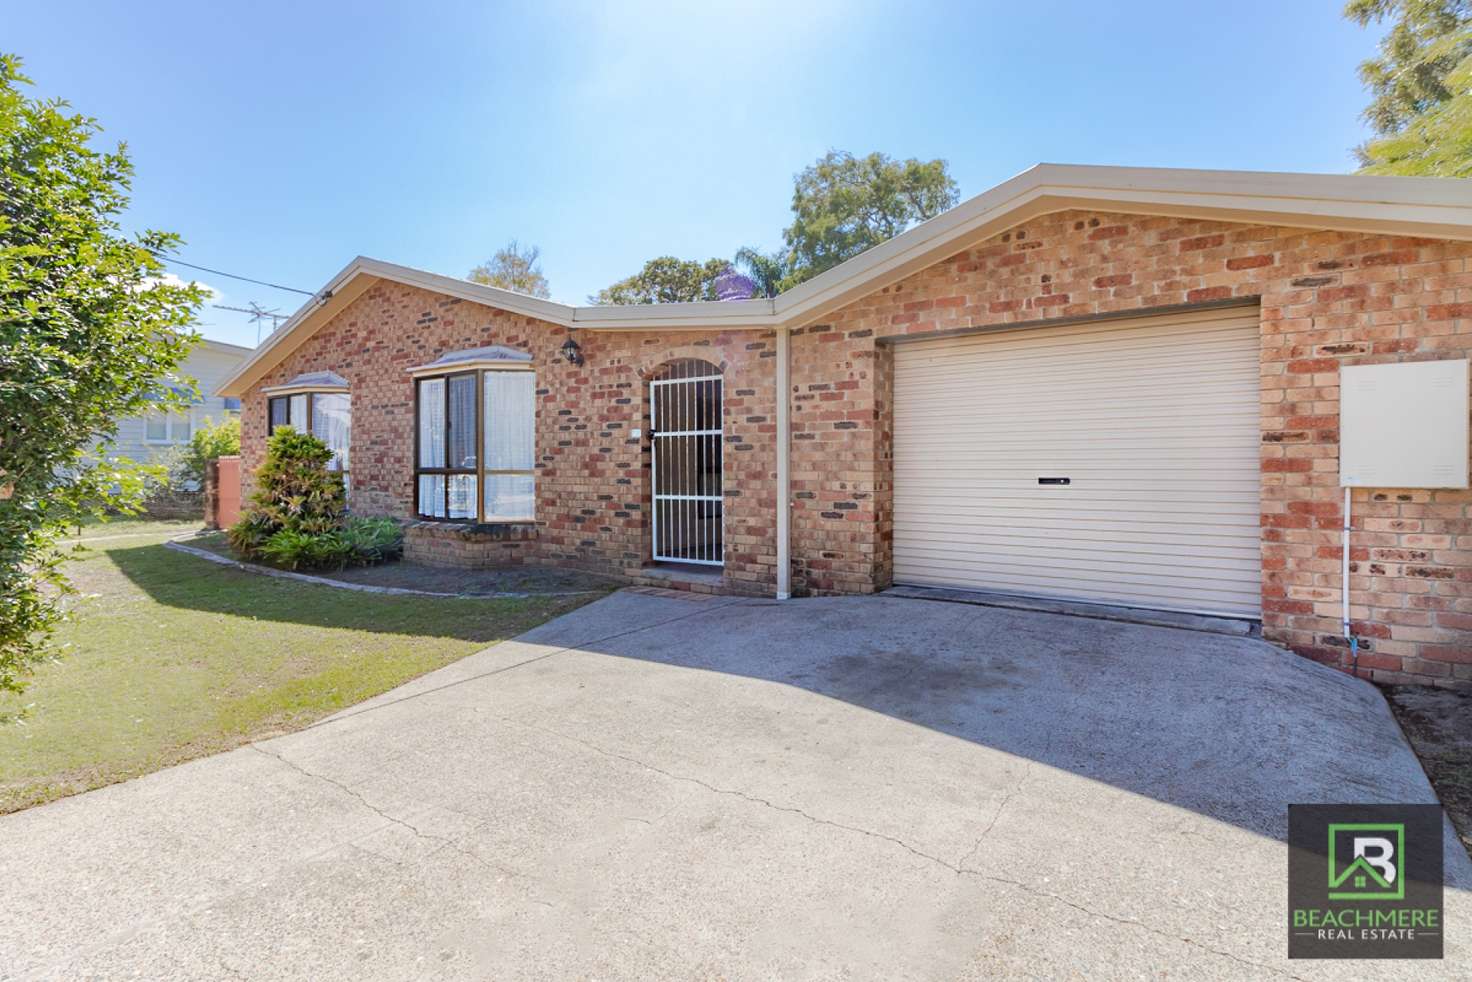 Main view of Homely house listing, 3 AMIES Street, Beachmere QLD 4510